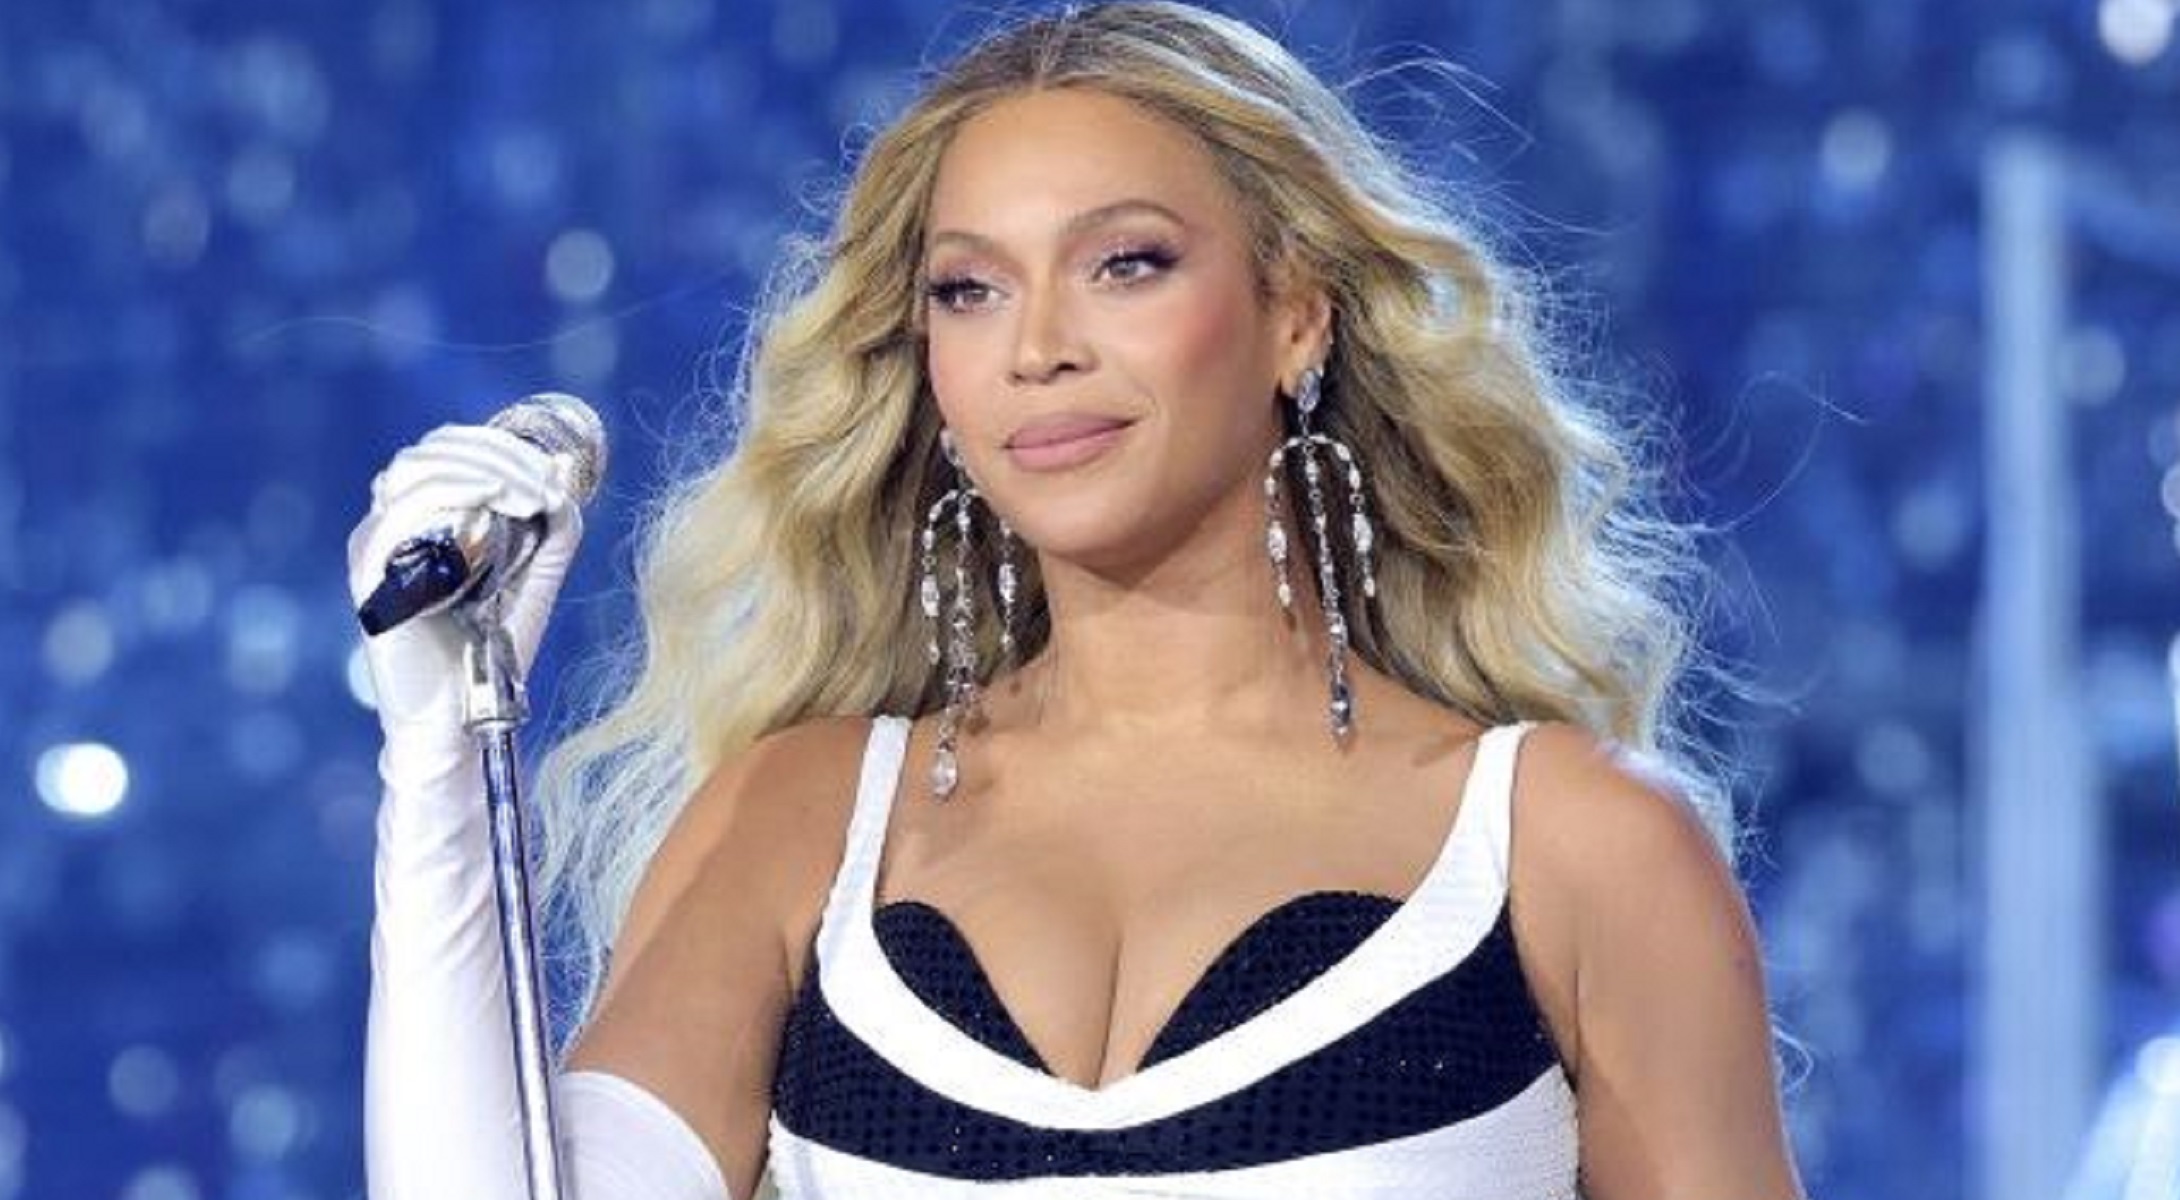 Beyonce Expresses Gratitude As ‘Renaissance’ Film Debuts at #1 On Box Office, “So Deeply Thankful”